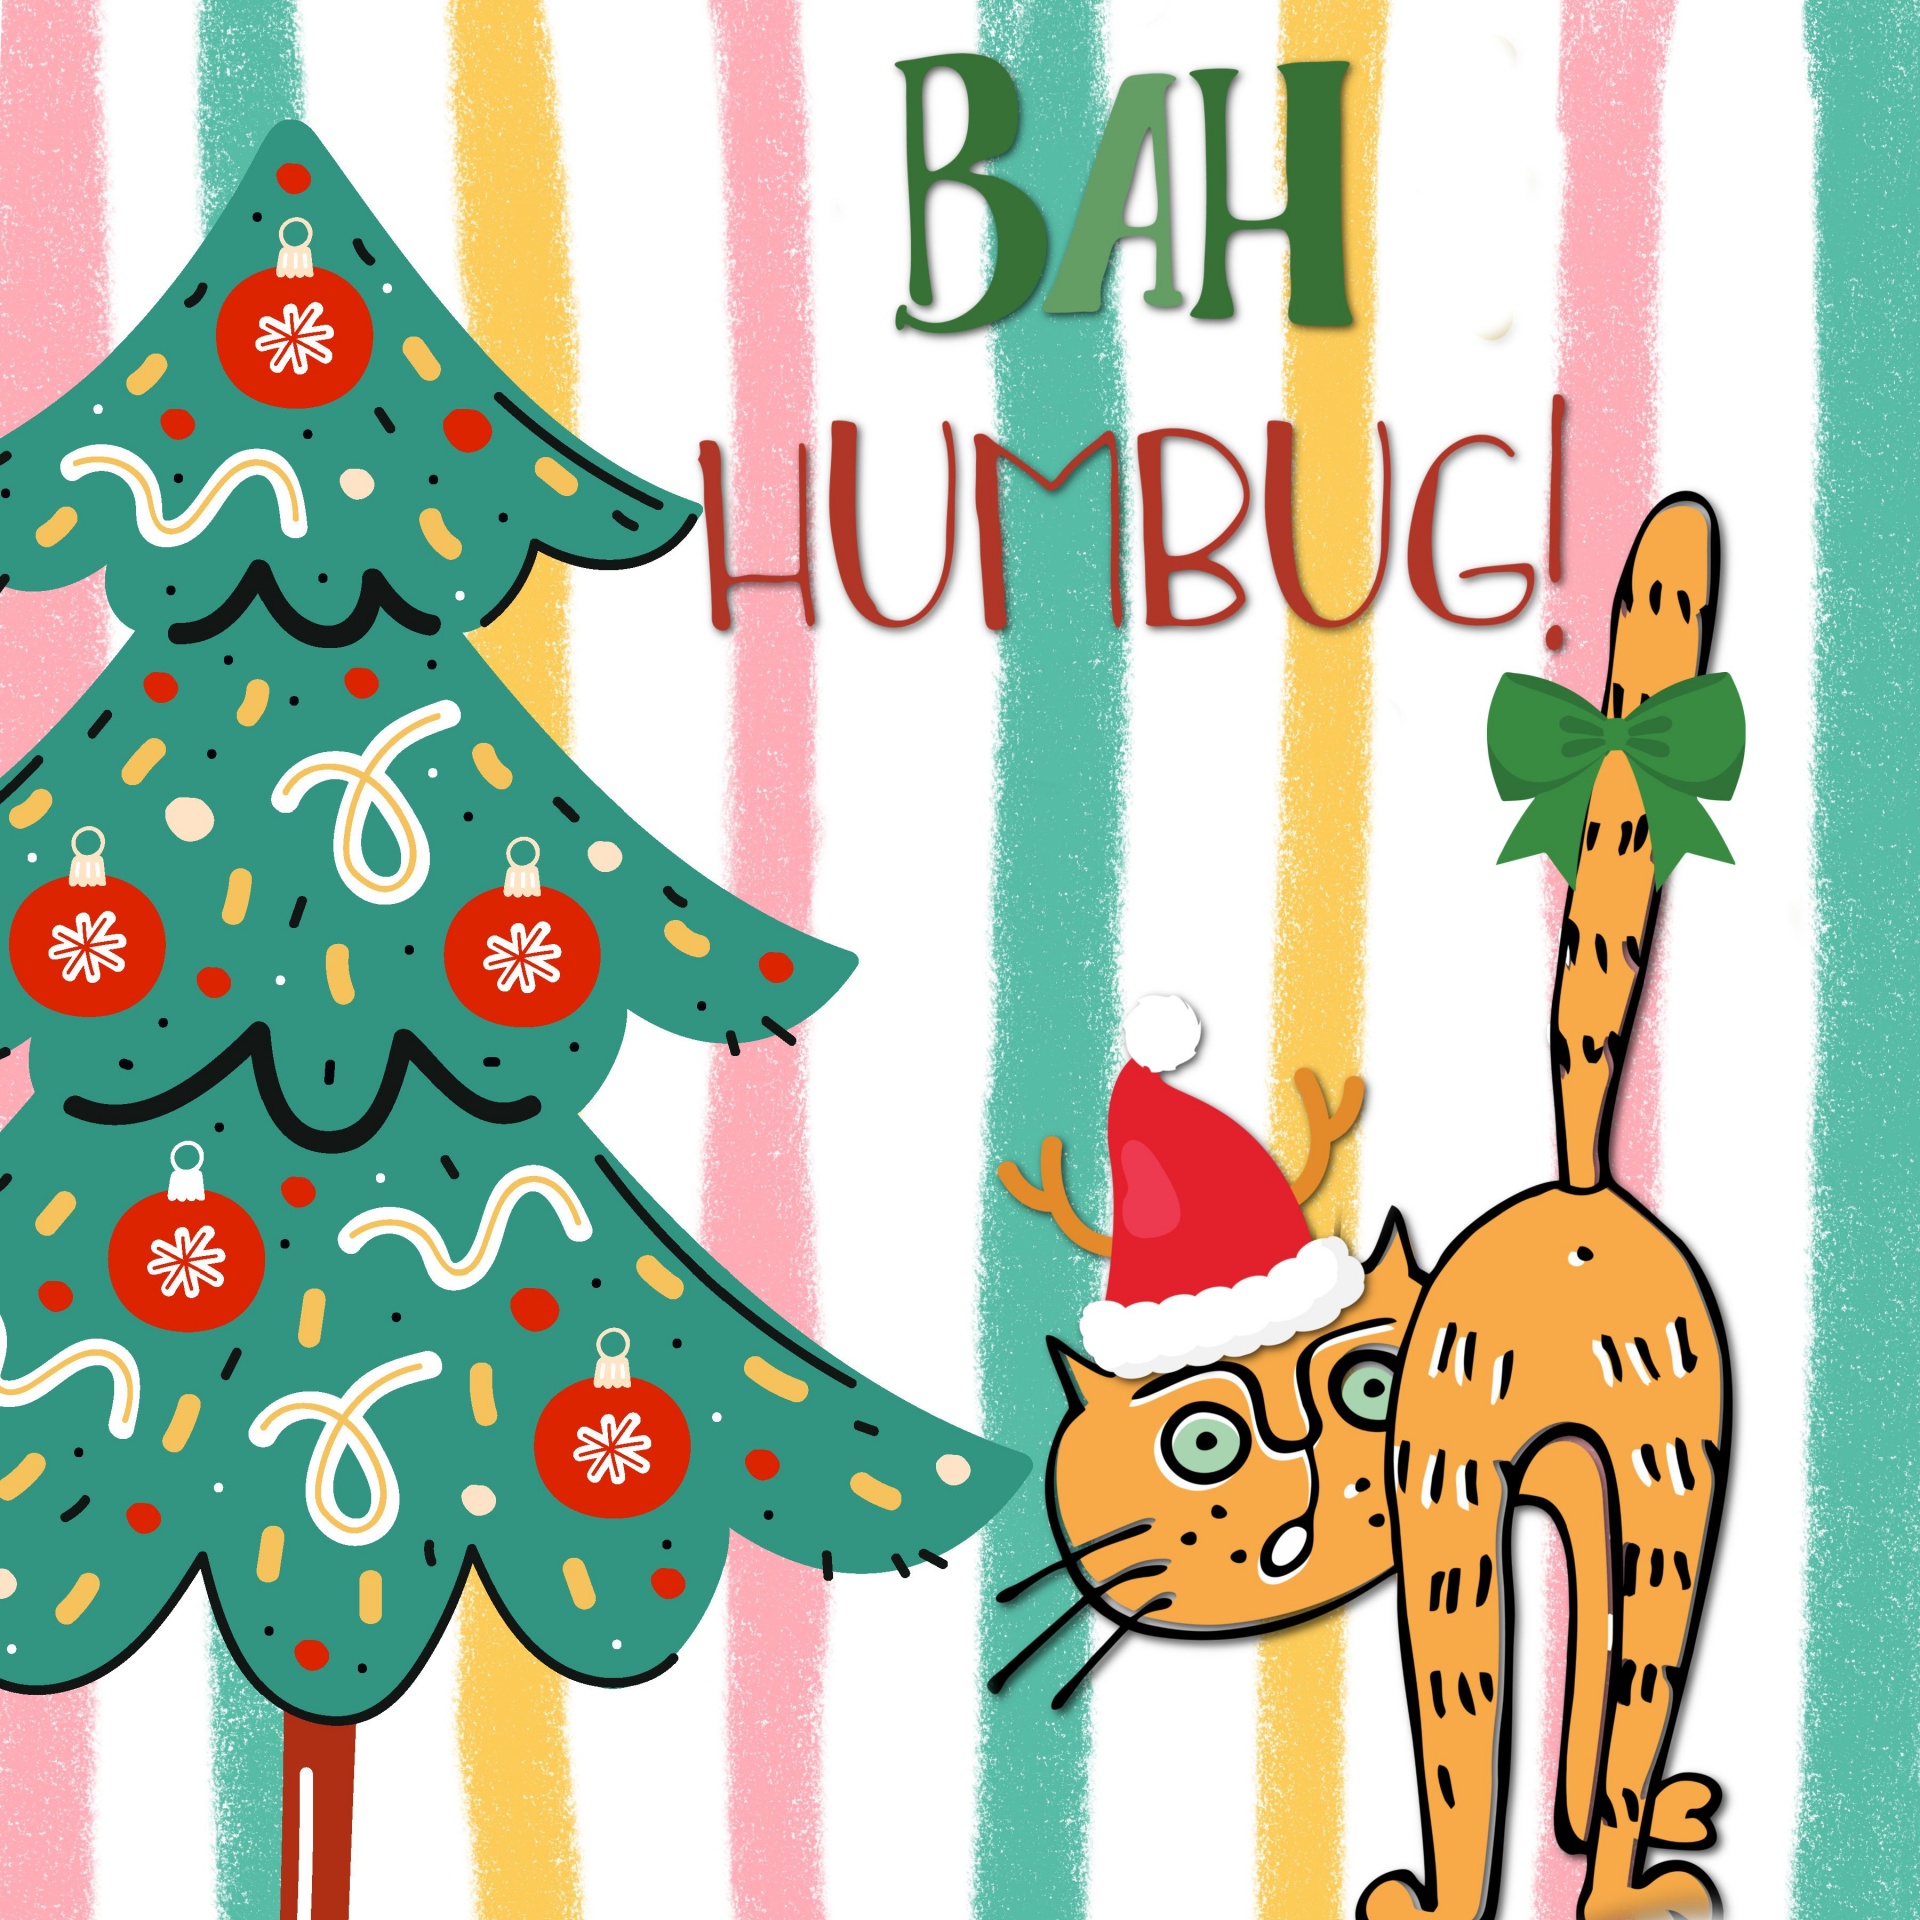 colorful illustration featuring a cartoon cat booing Christmas